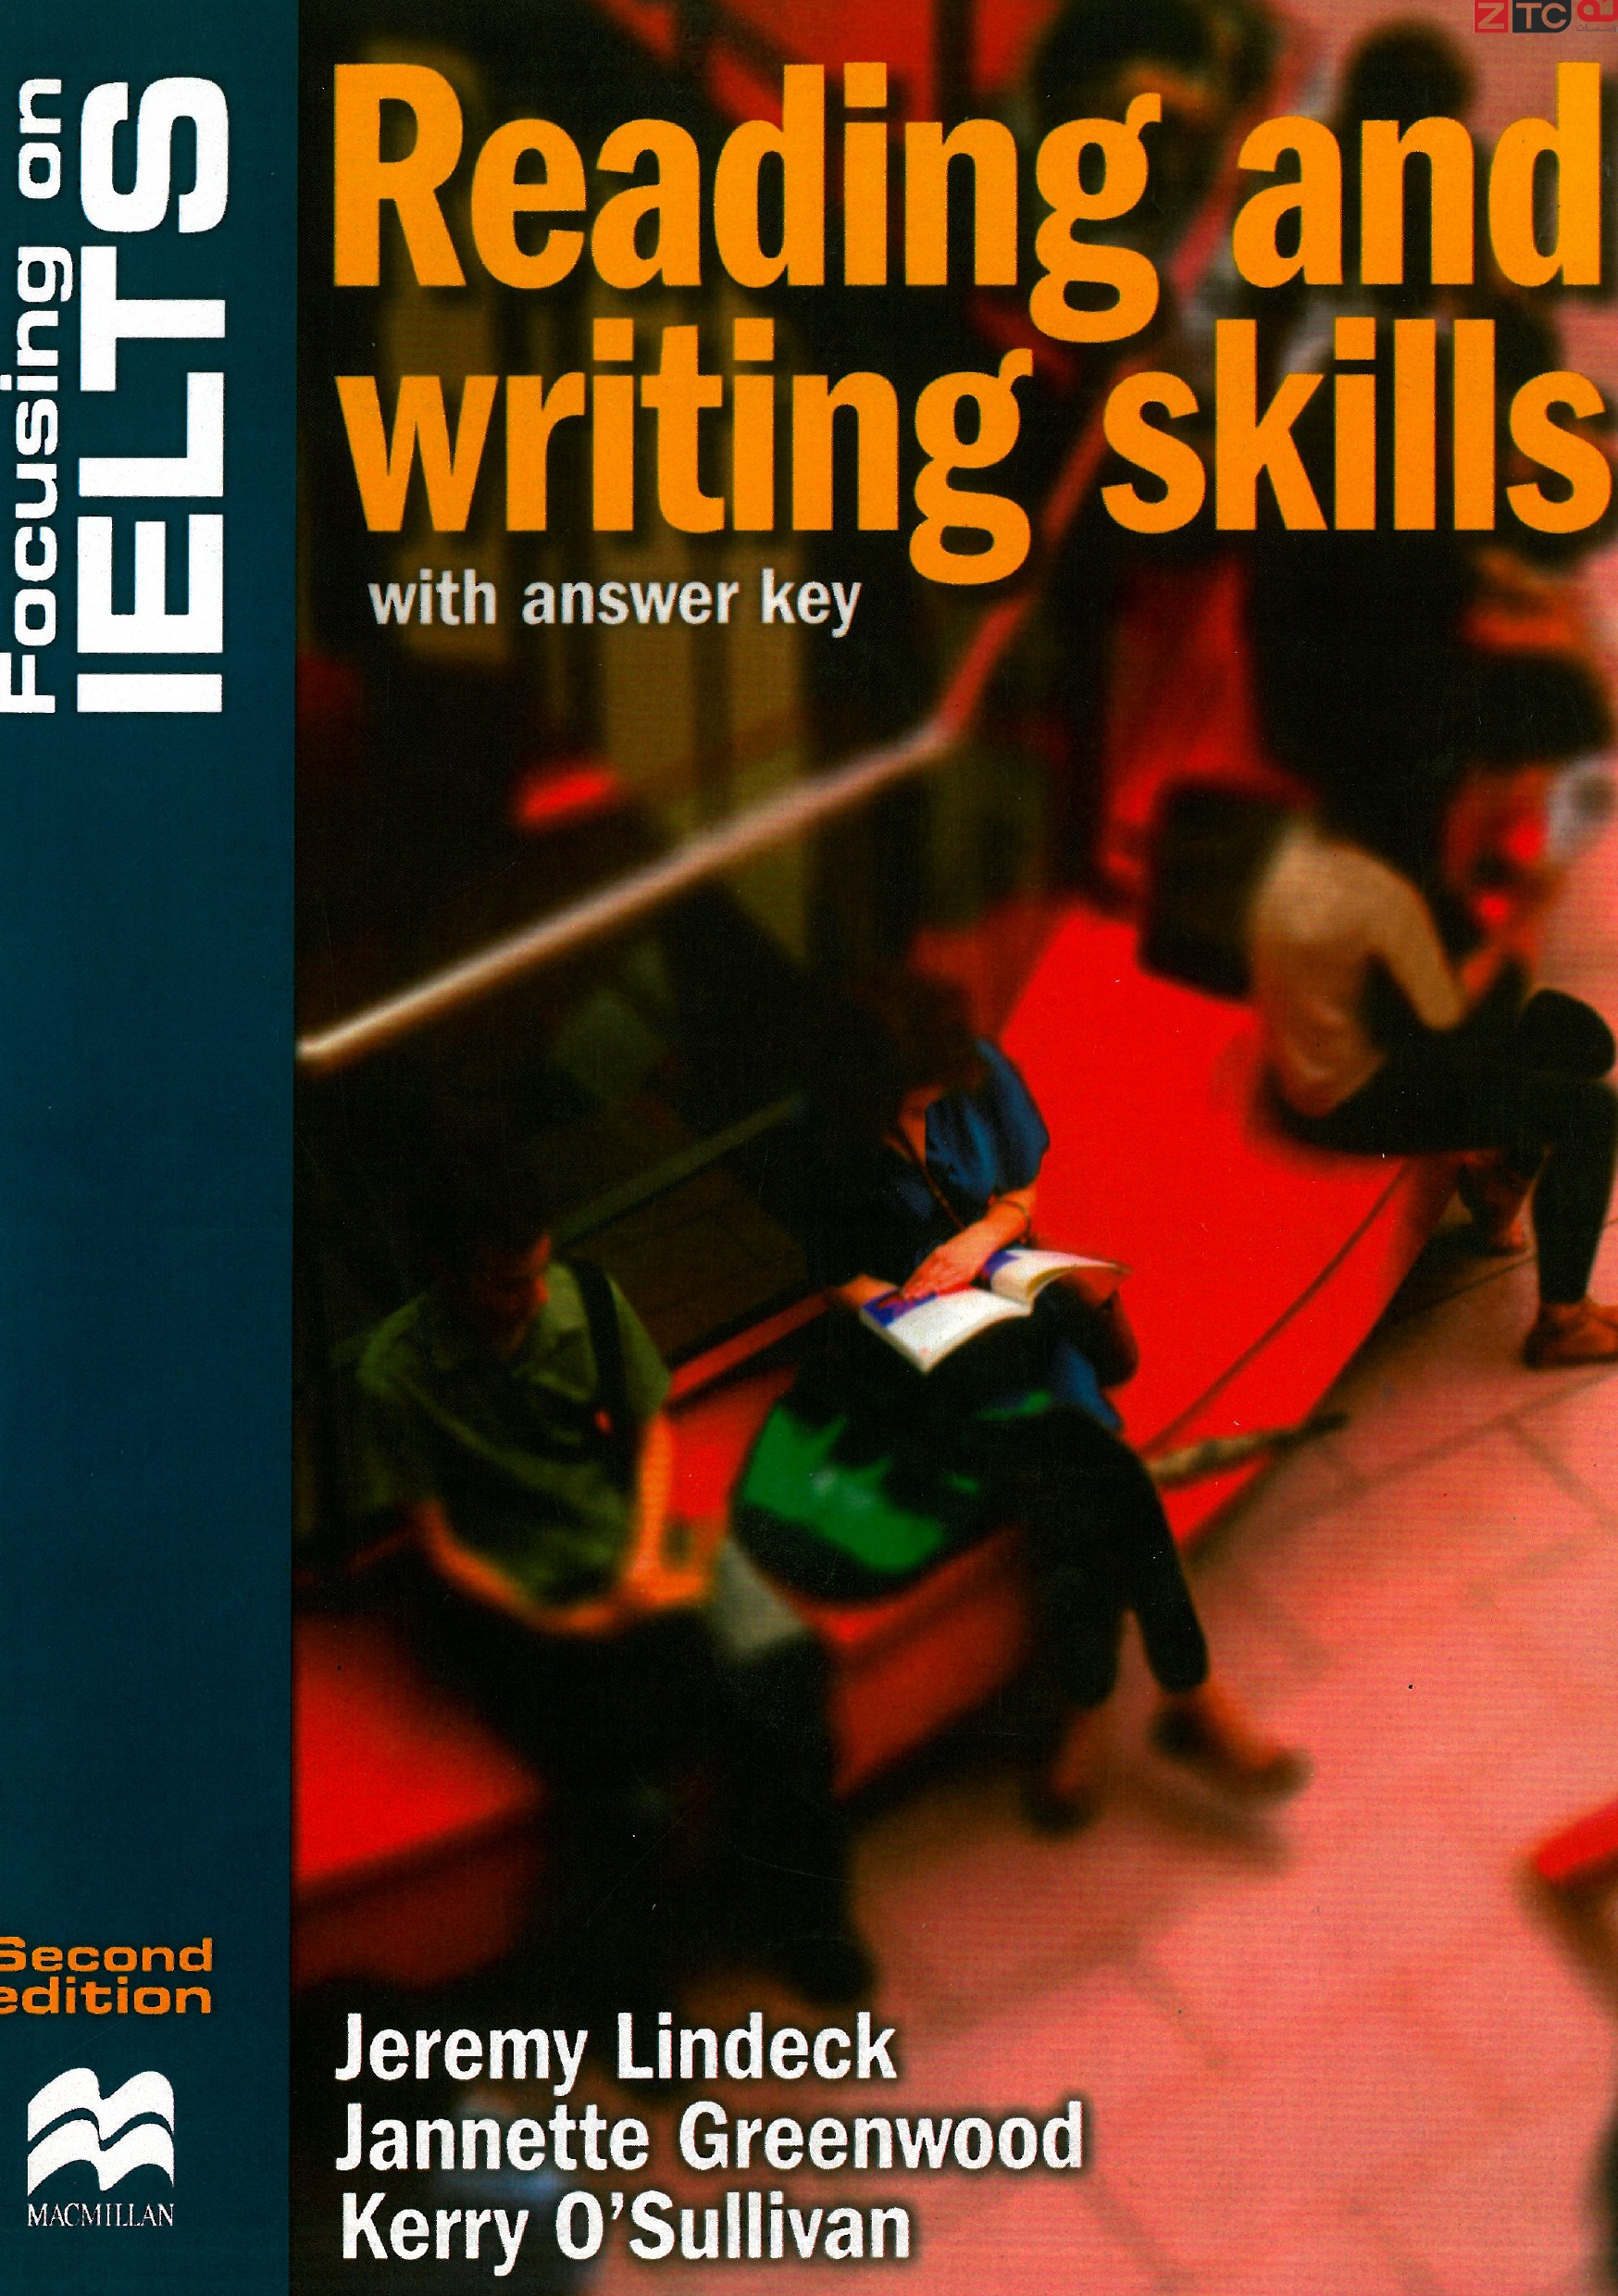 Focusing on IELTS Reading and Writing Skills